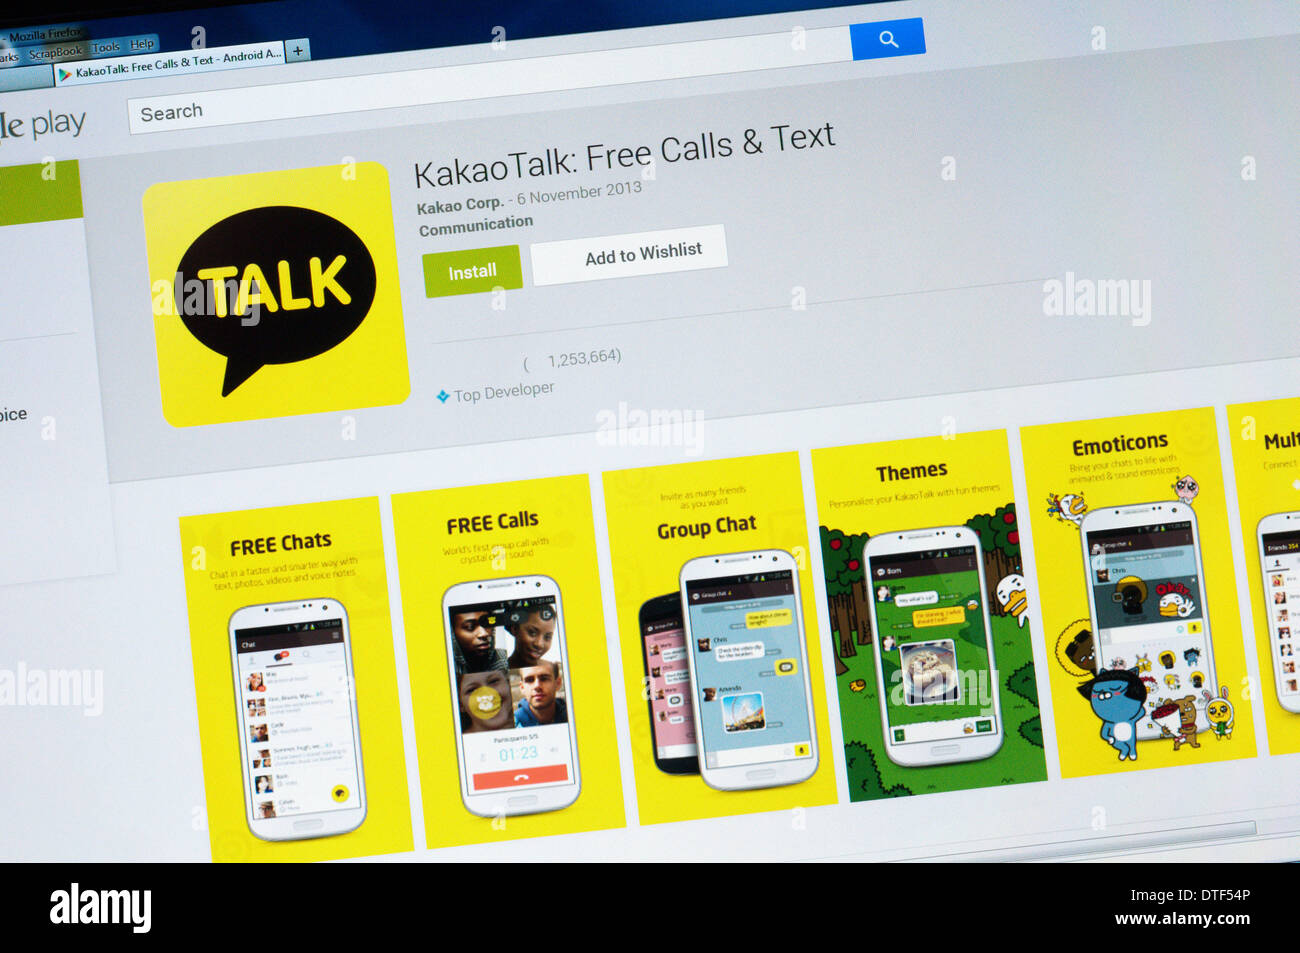 The home page of the Kakao Talk web site - a free mobile messenger application for smartphones. Stock Photo